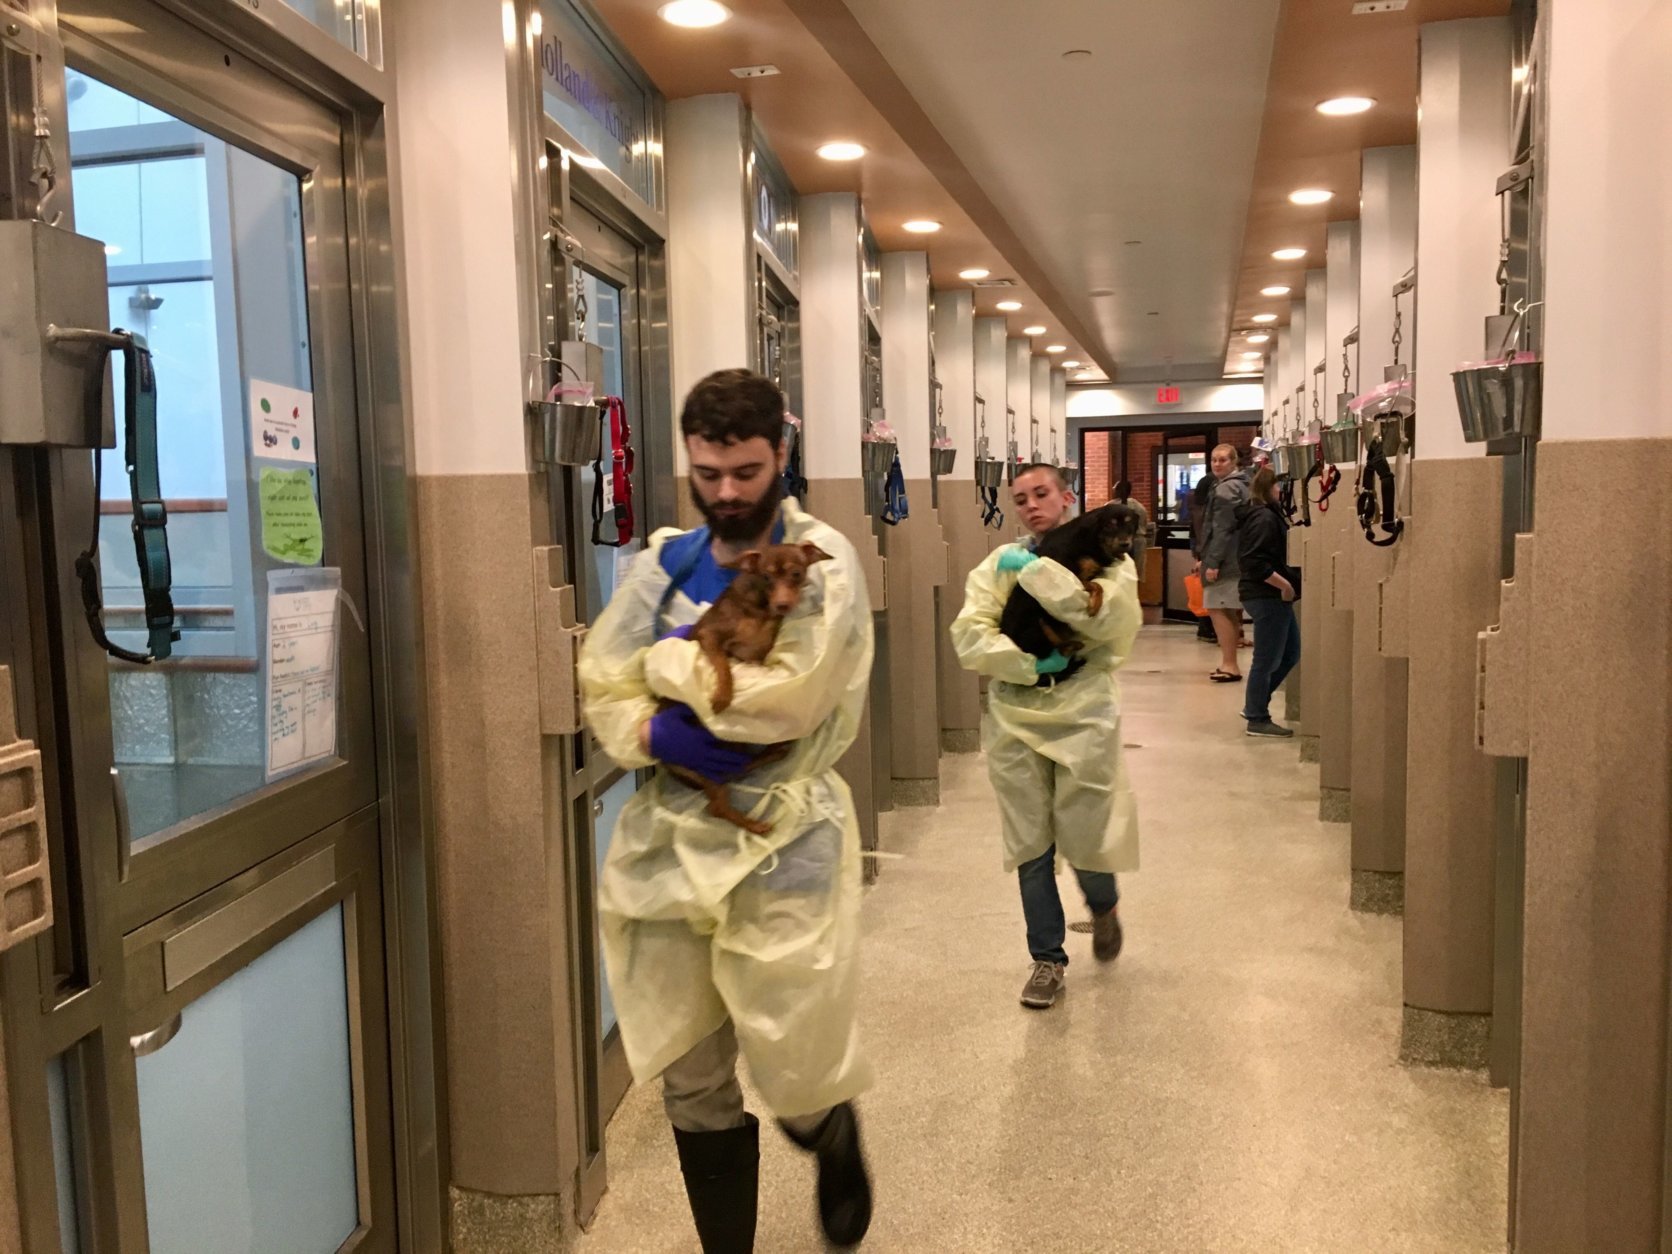 Members of the Humane Rescue Alliance caring for dogs rescued from a hoarding situation in West Virginia. (Courtesy of Humane Rescue Alliance)